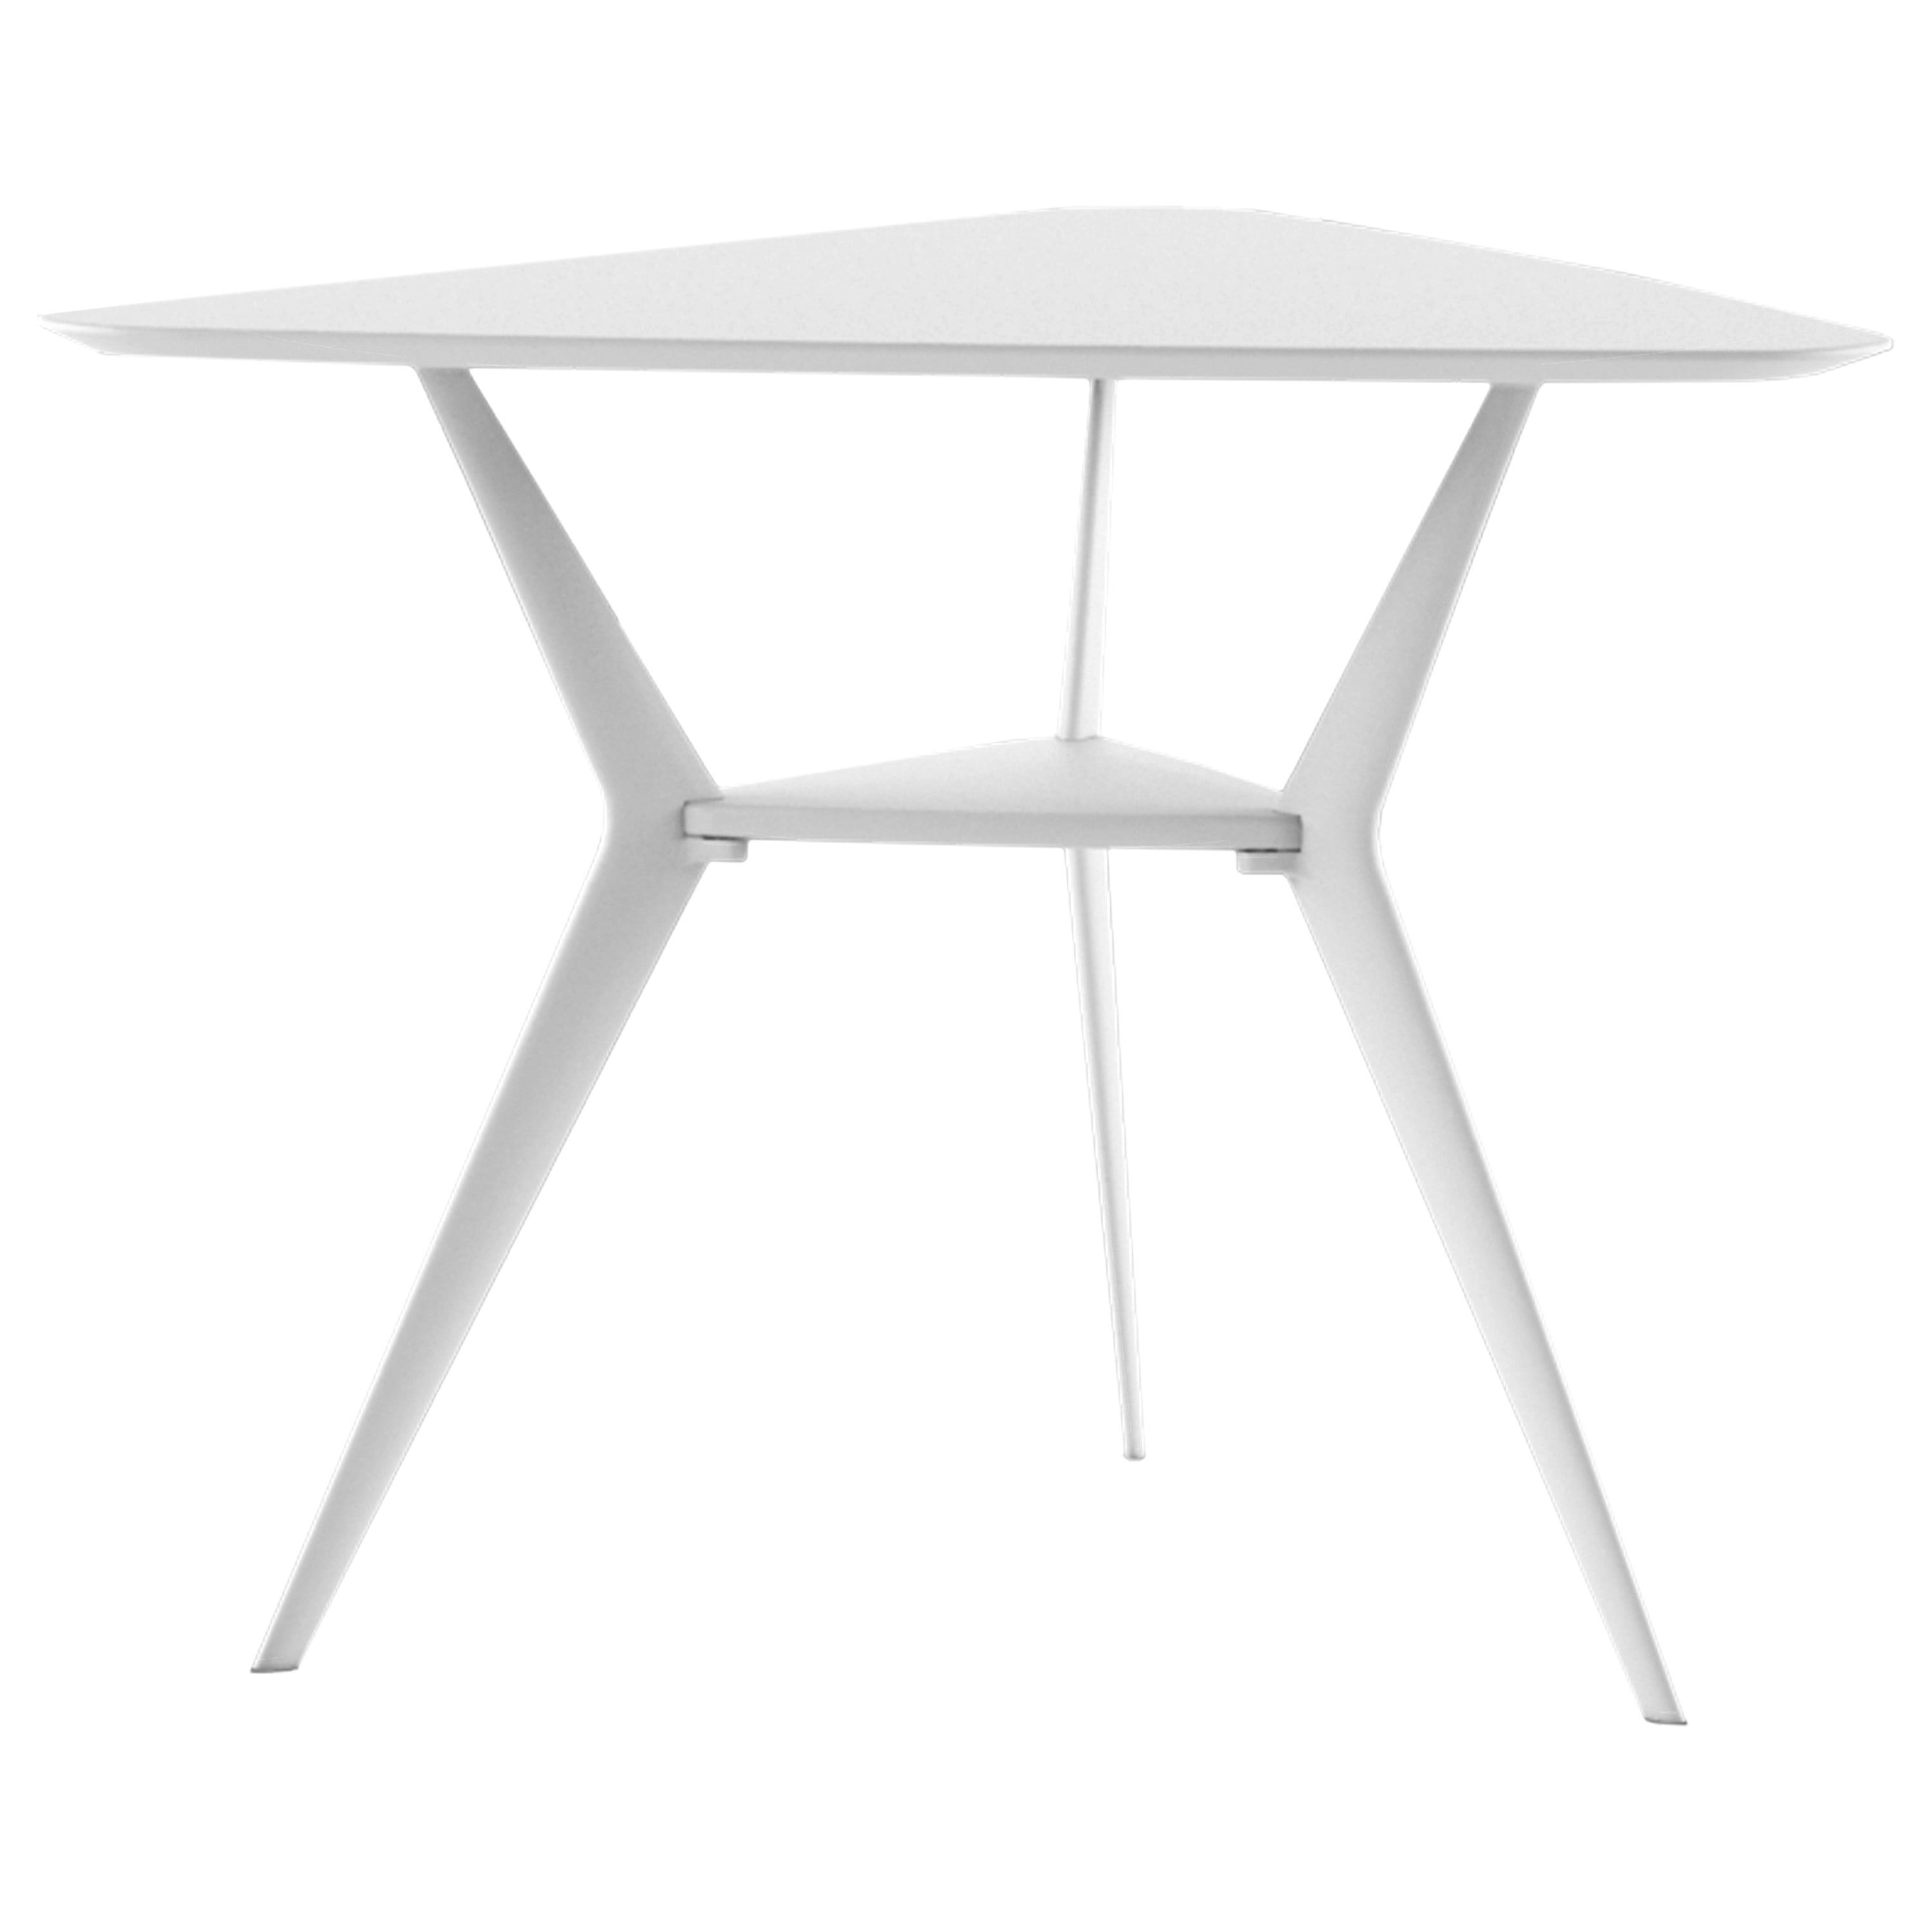 Alias B01 Biplane XS Triangular Outdoor Table in White Top and Lacquered Frame